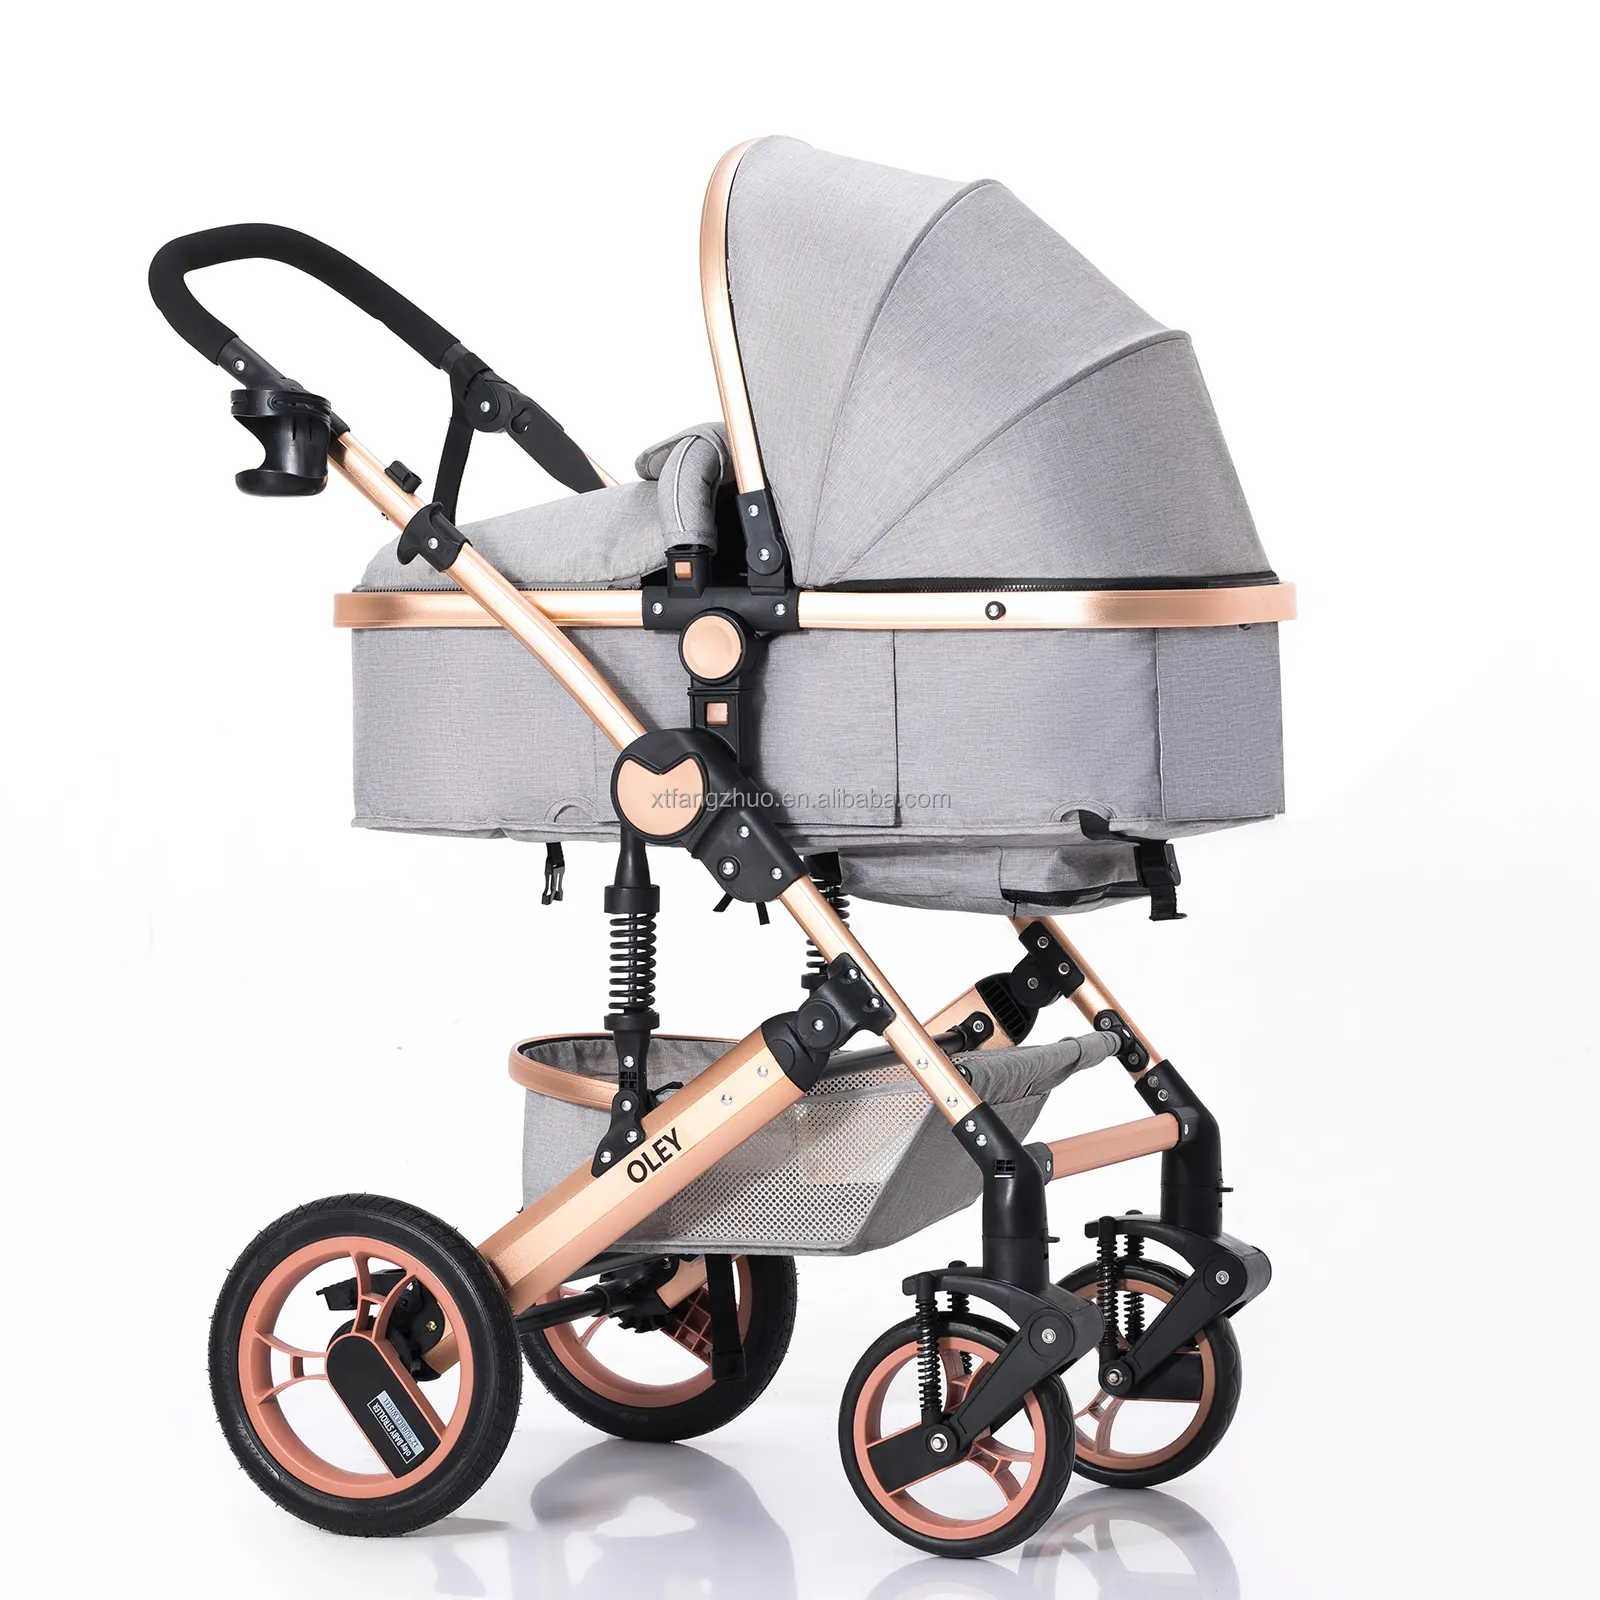 OEM Service Baby Doll Stroller with rain cover for Carriage newborn baby to travel/Kids Gifts Travel Kids Gifts baby pram